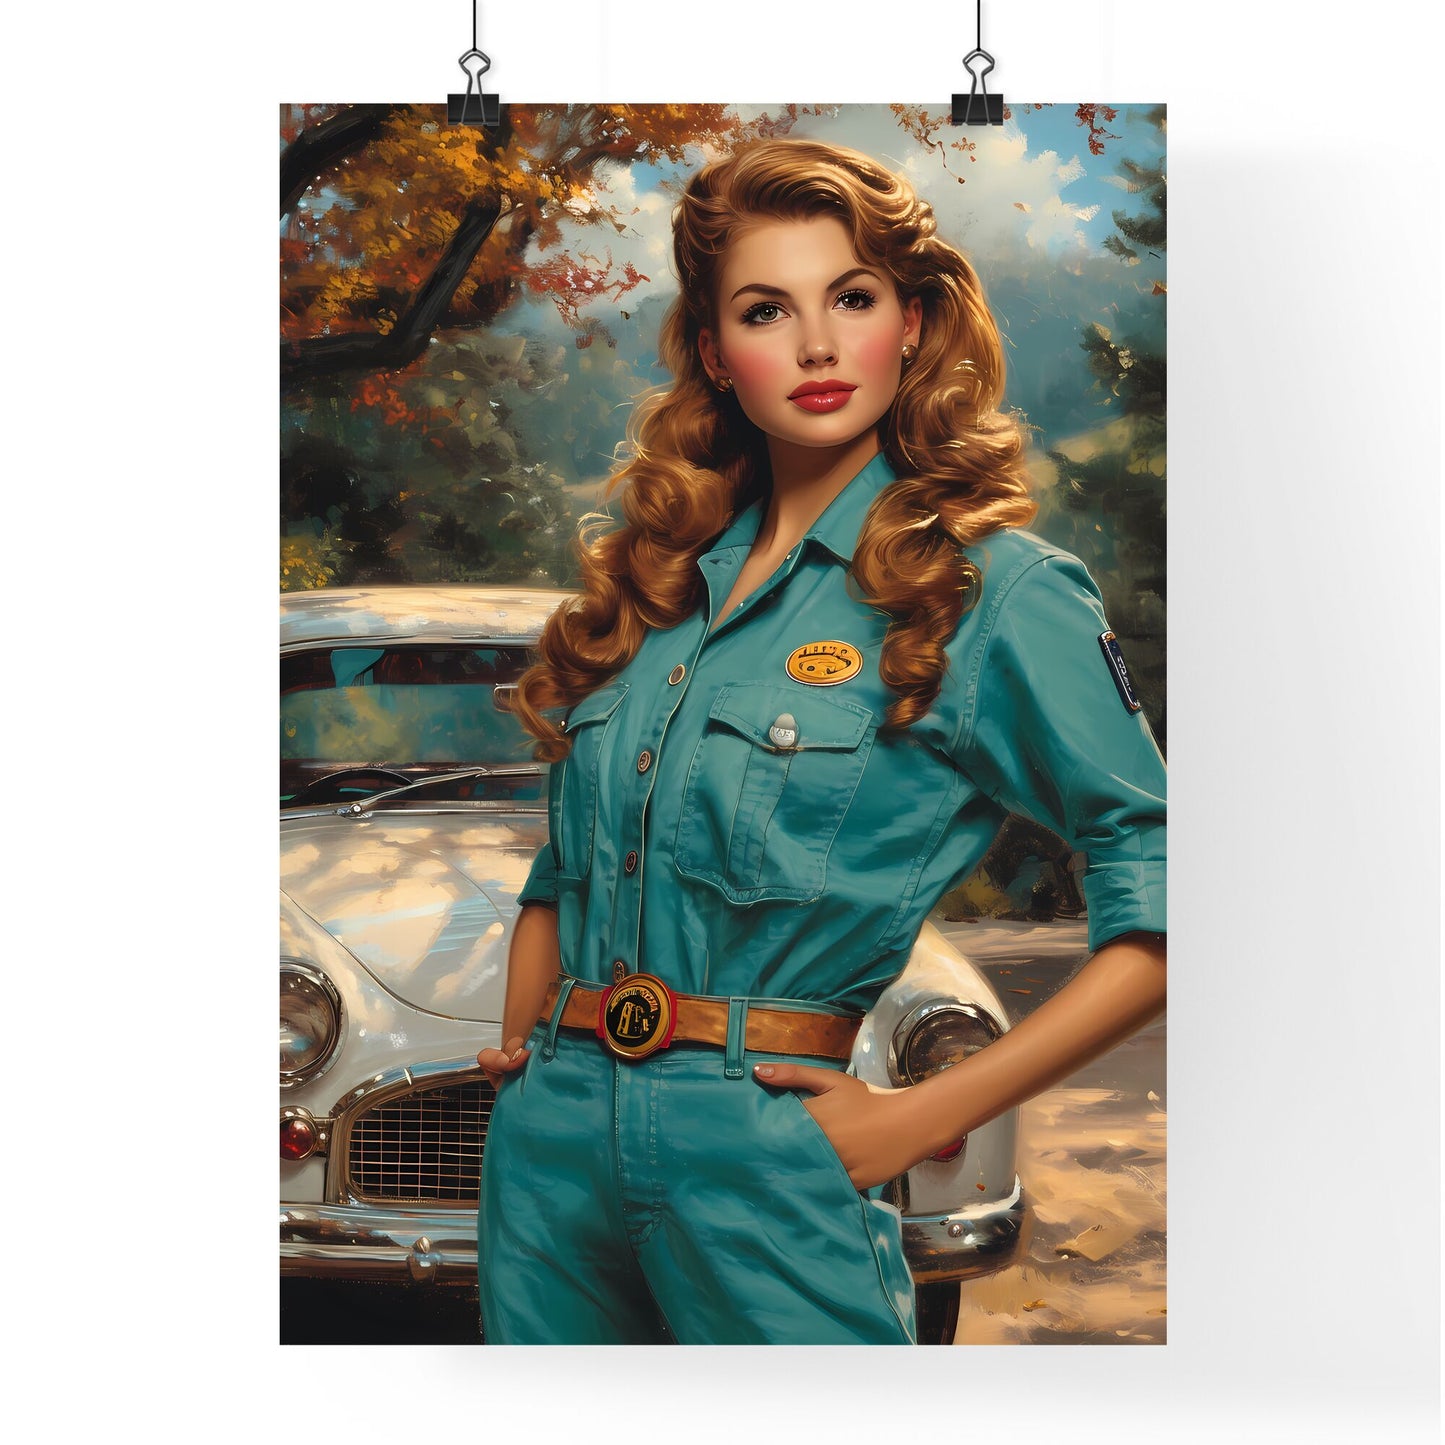 Full body shot pin up garage worker girl - Art print of a woman lying on a bed Default Title